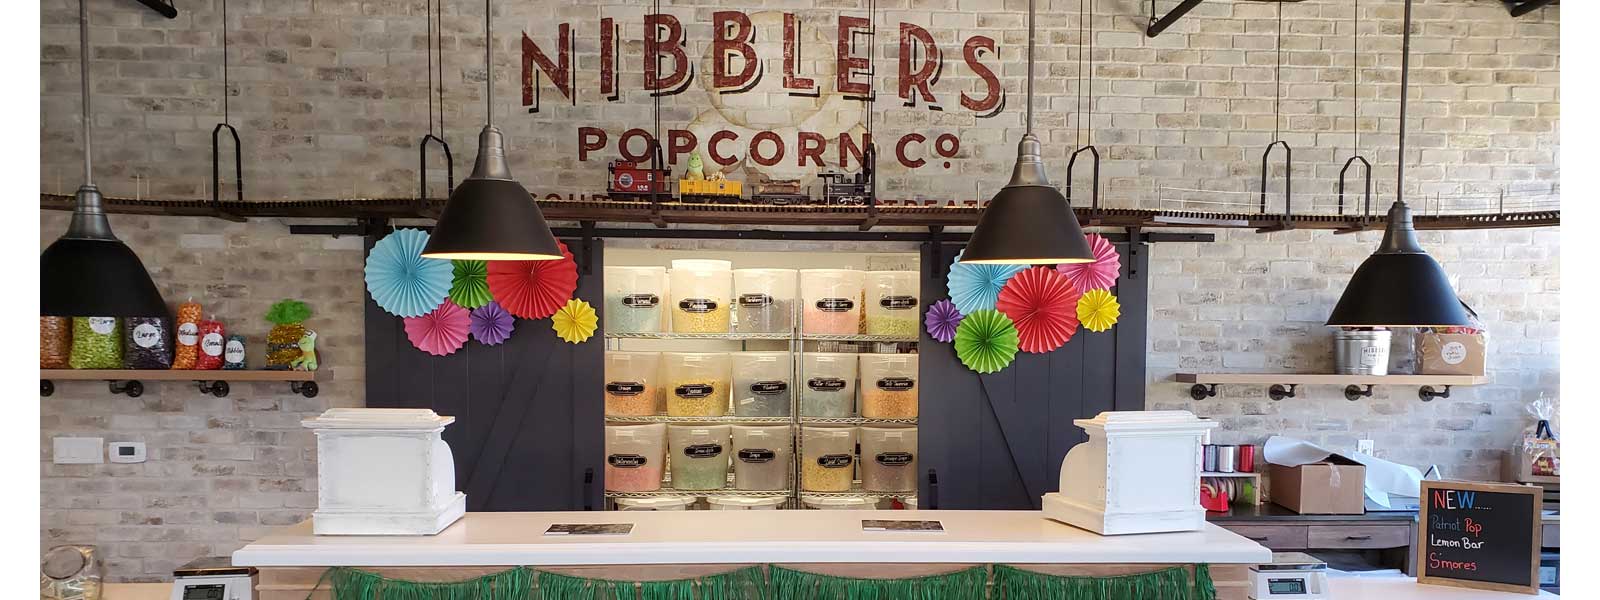 M&Ms Colorworks - White - Nibblers Popcorn Company